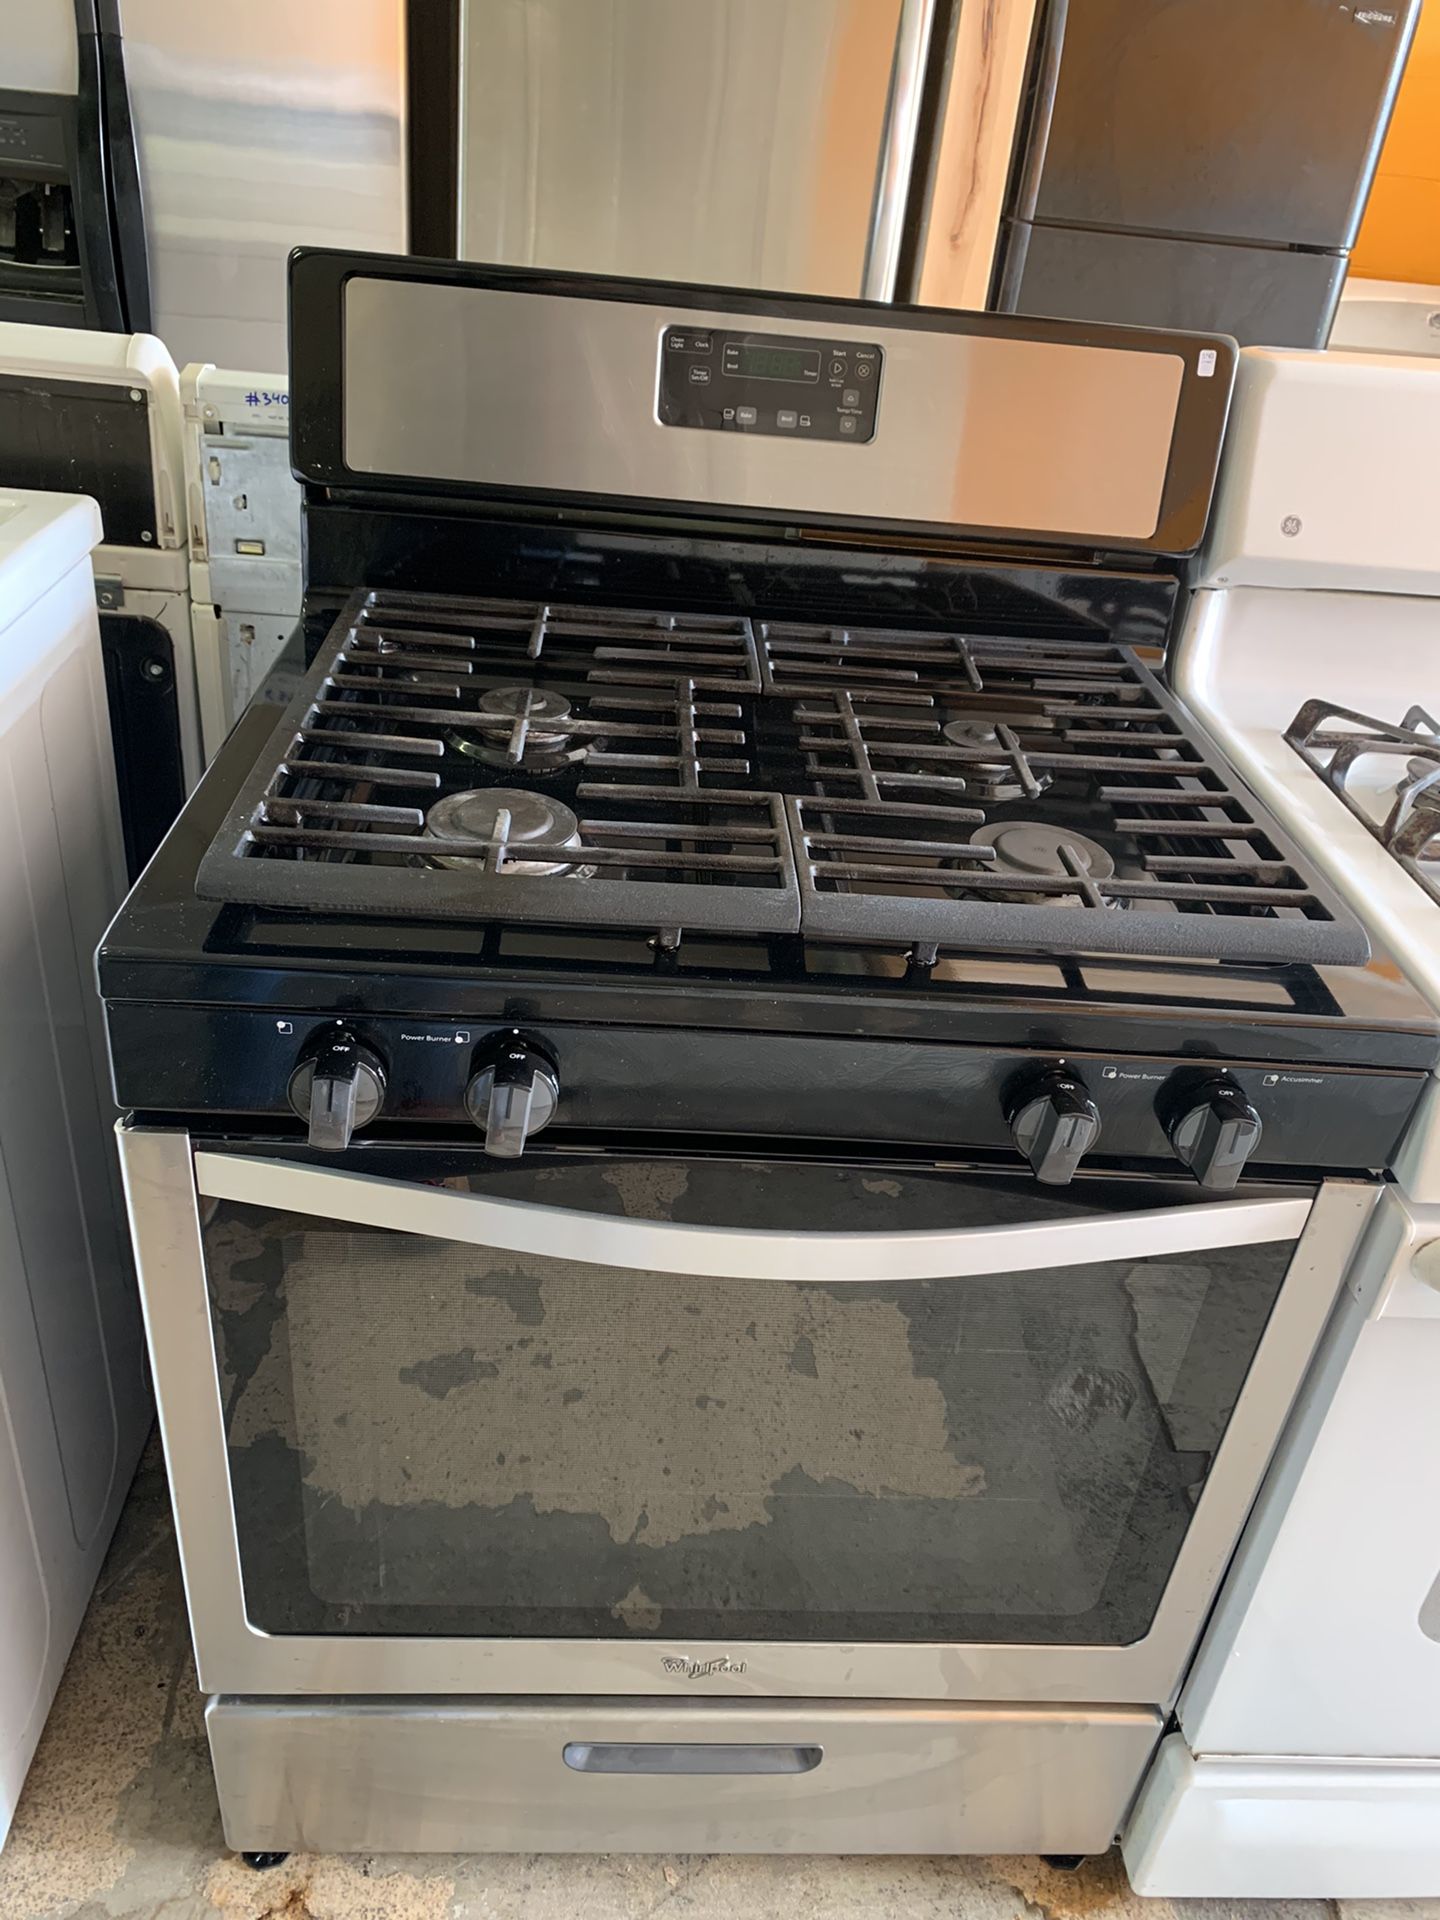 Whirlpool Stove With Warranty